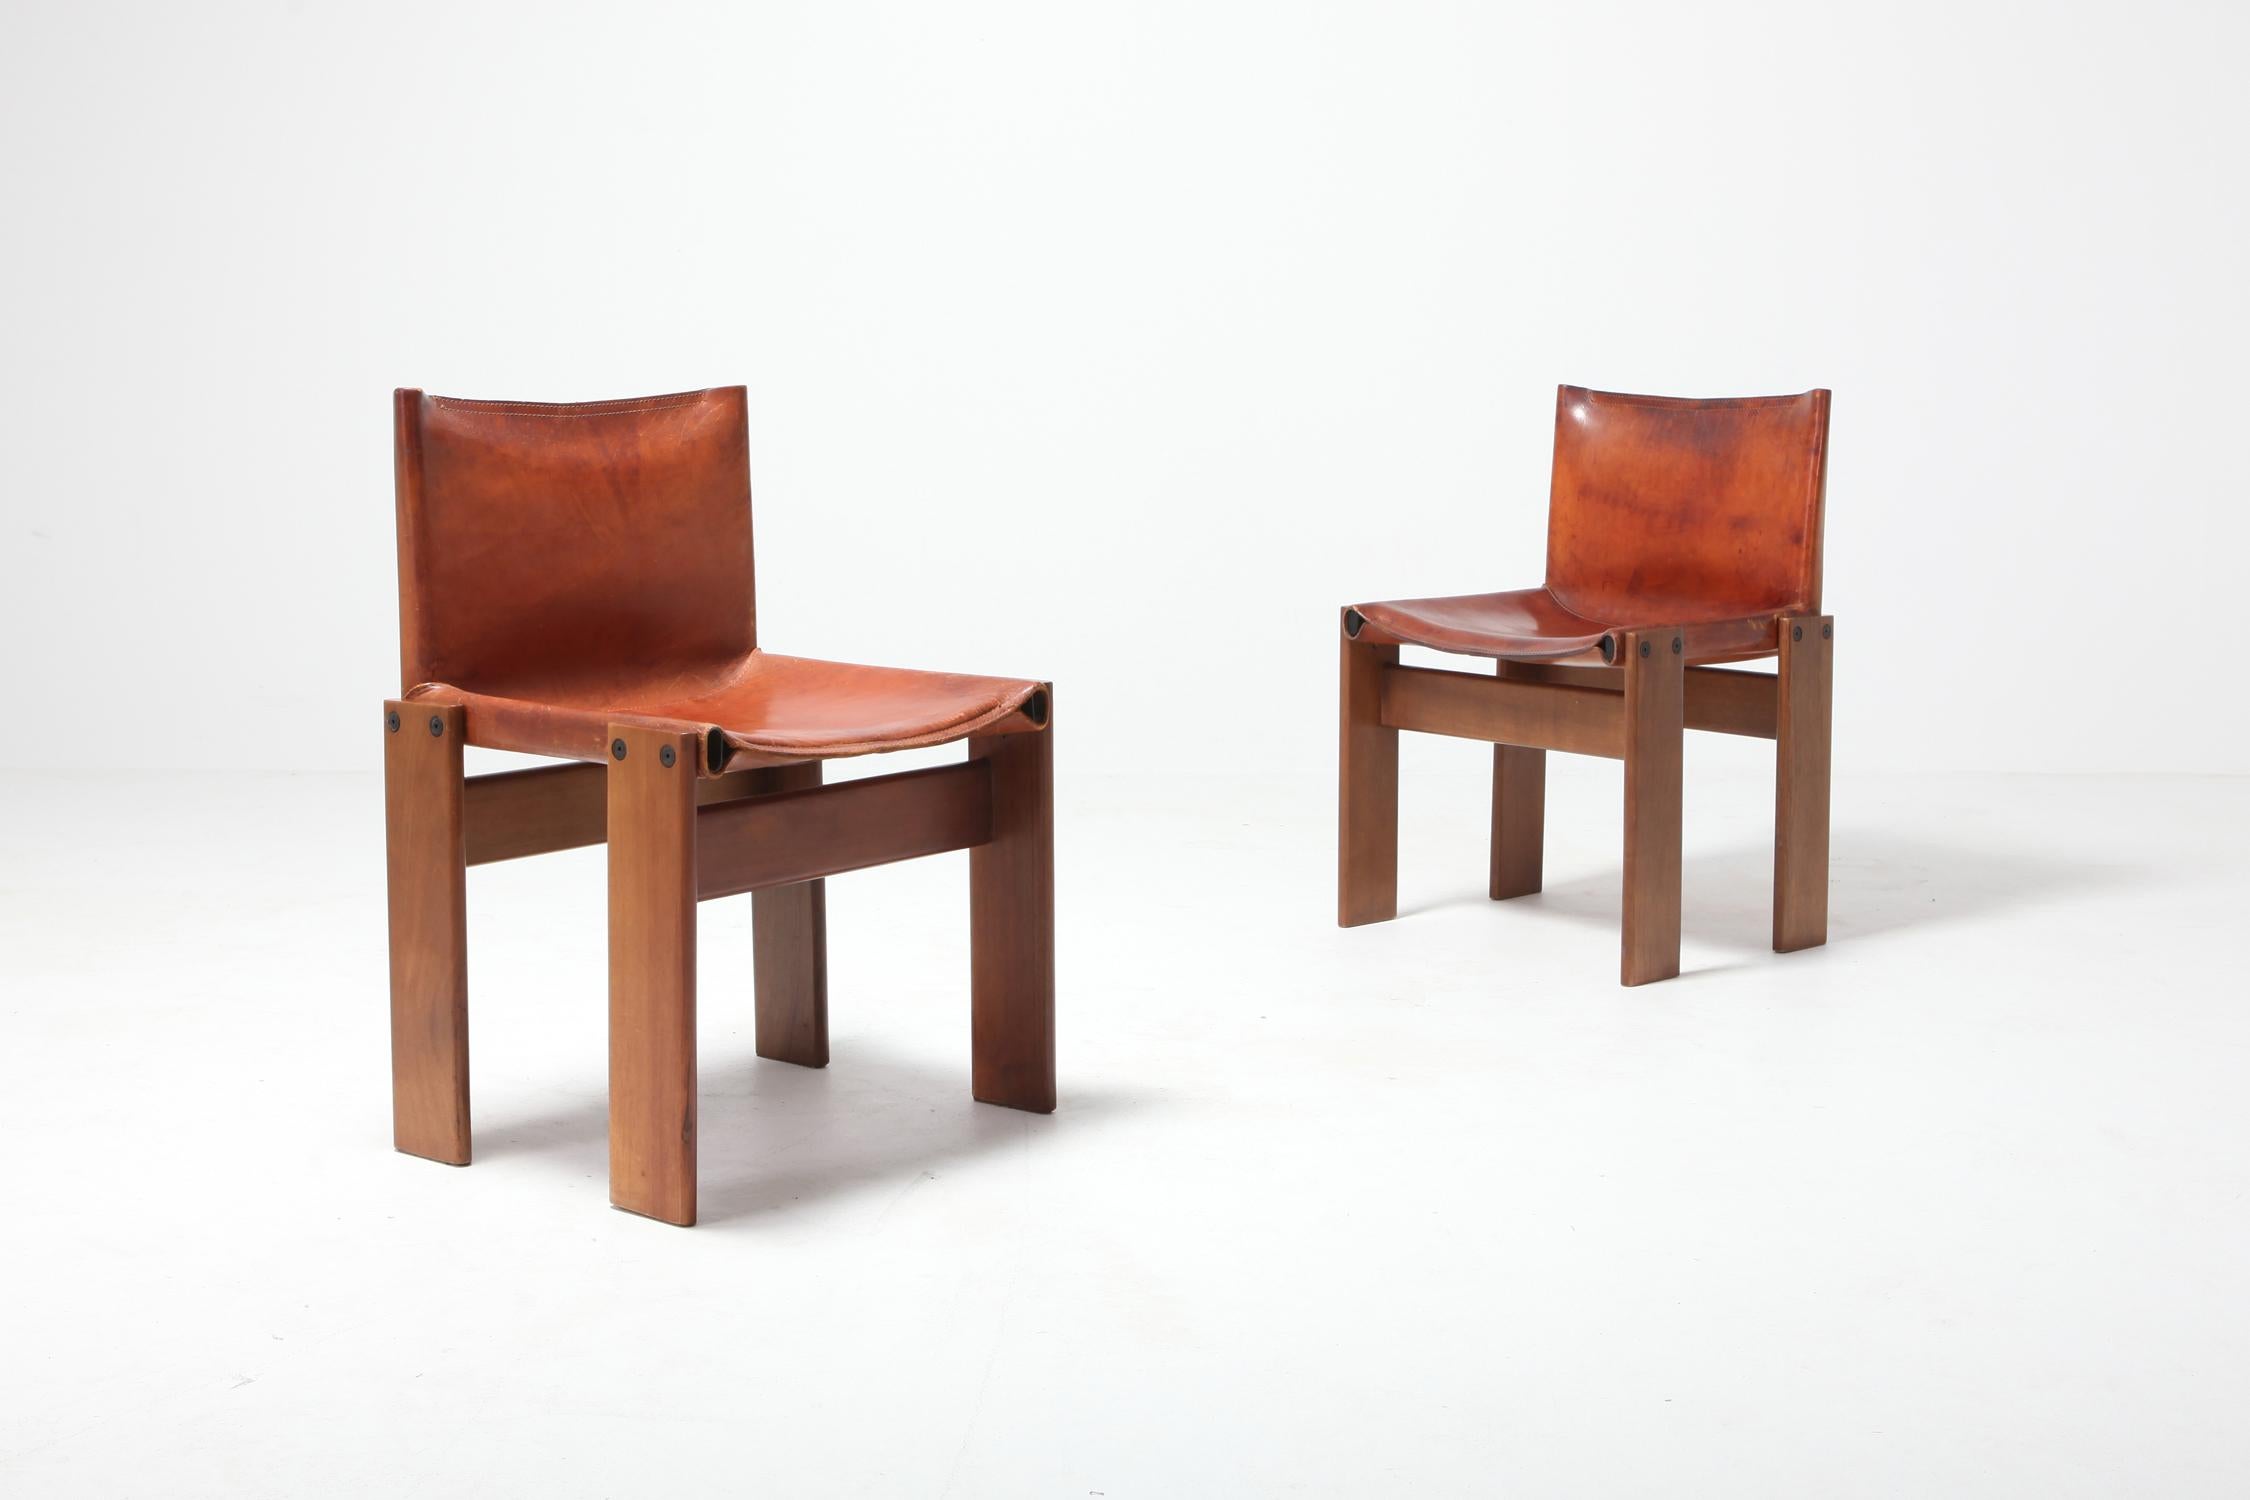 Scarpa 'Monk' Chairs in Patinated Cognac Leather, Set of Four 4